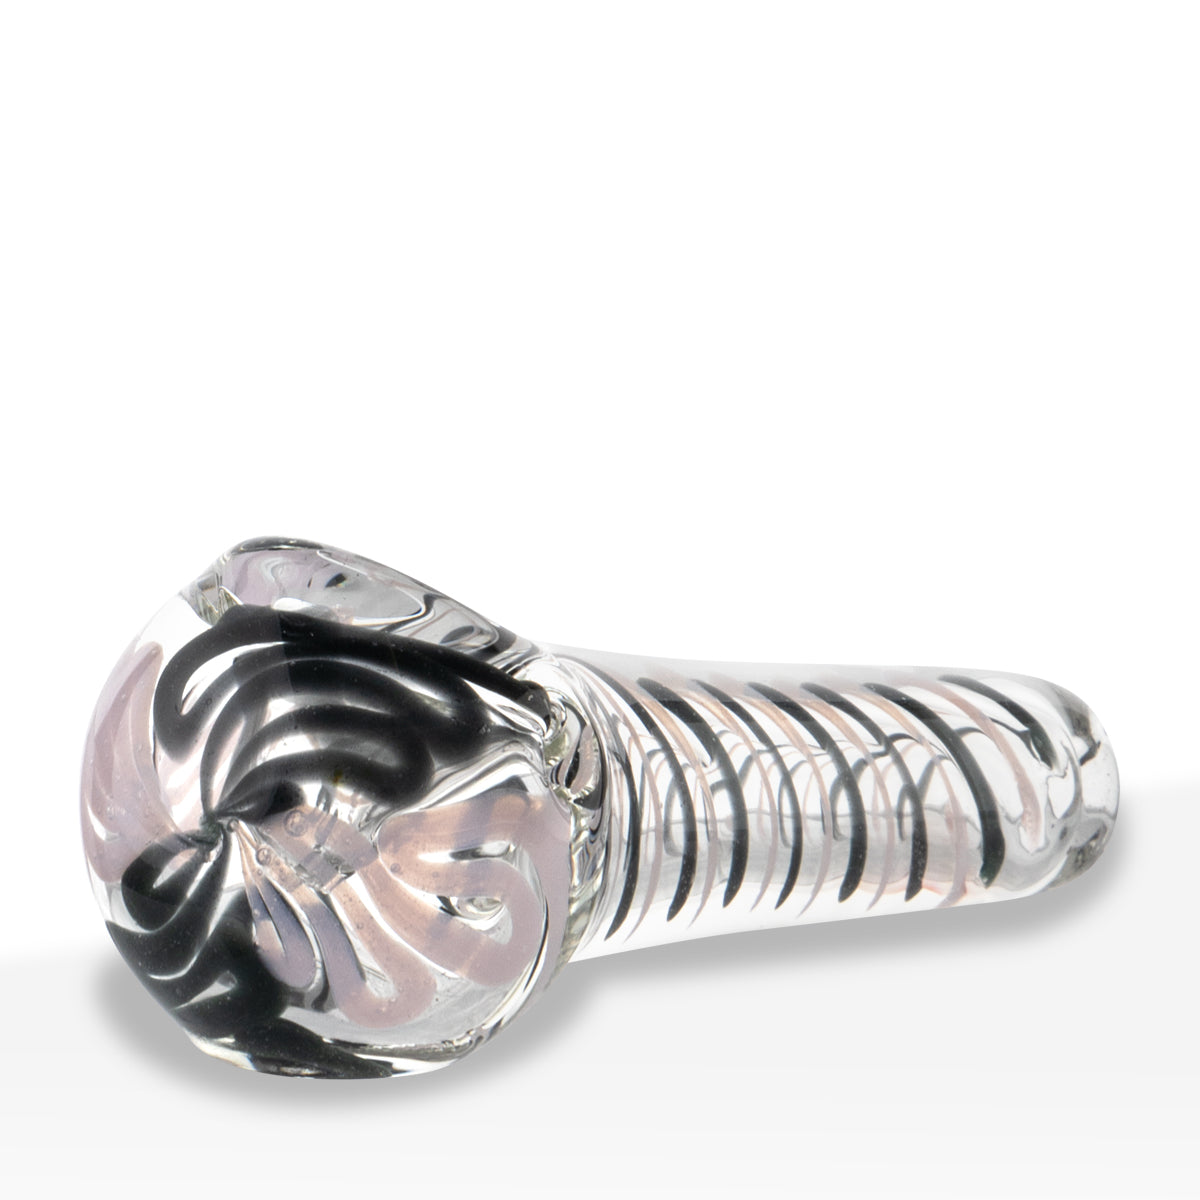 3" Helix Slyme Spoon Hand Pipe